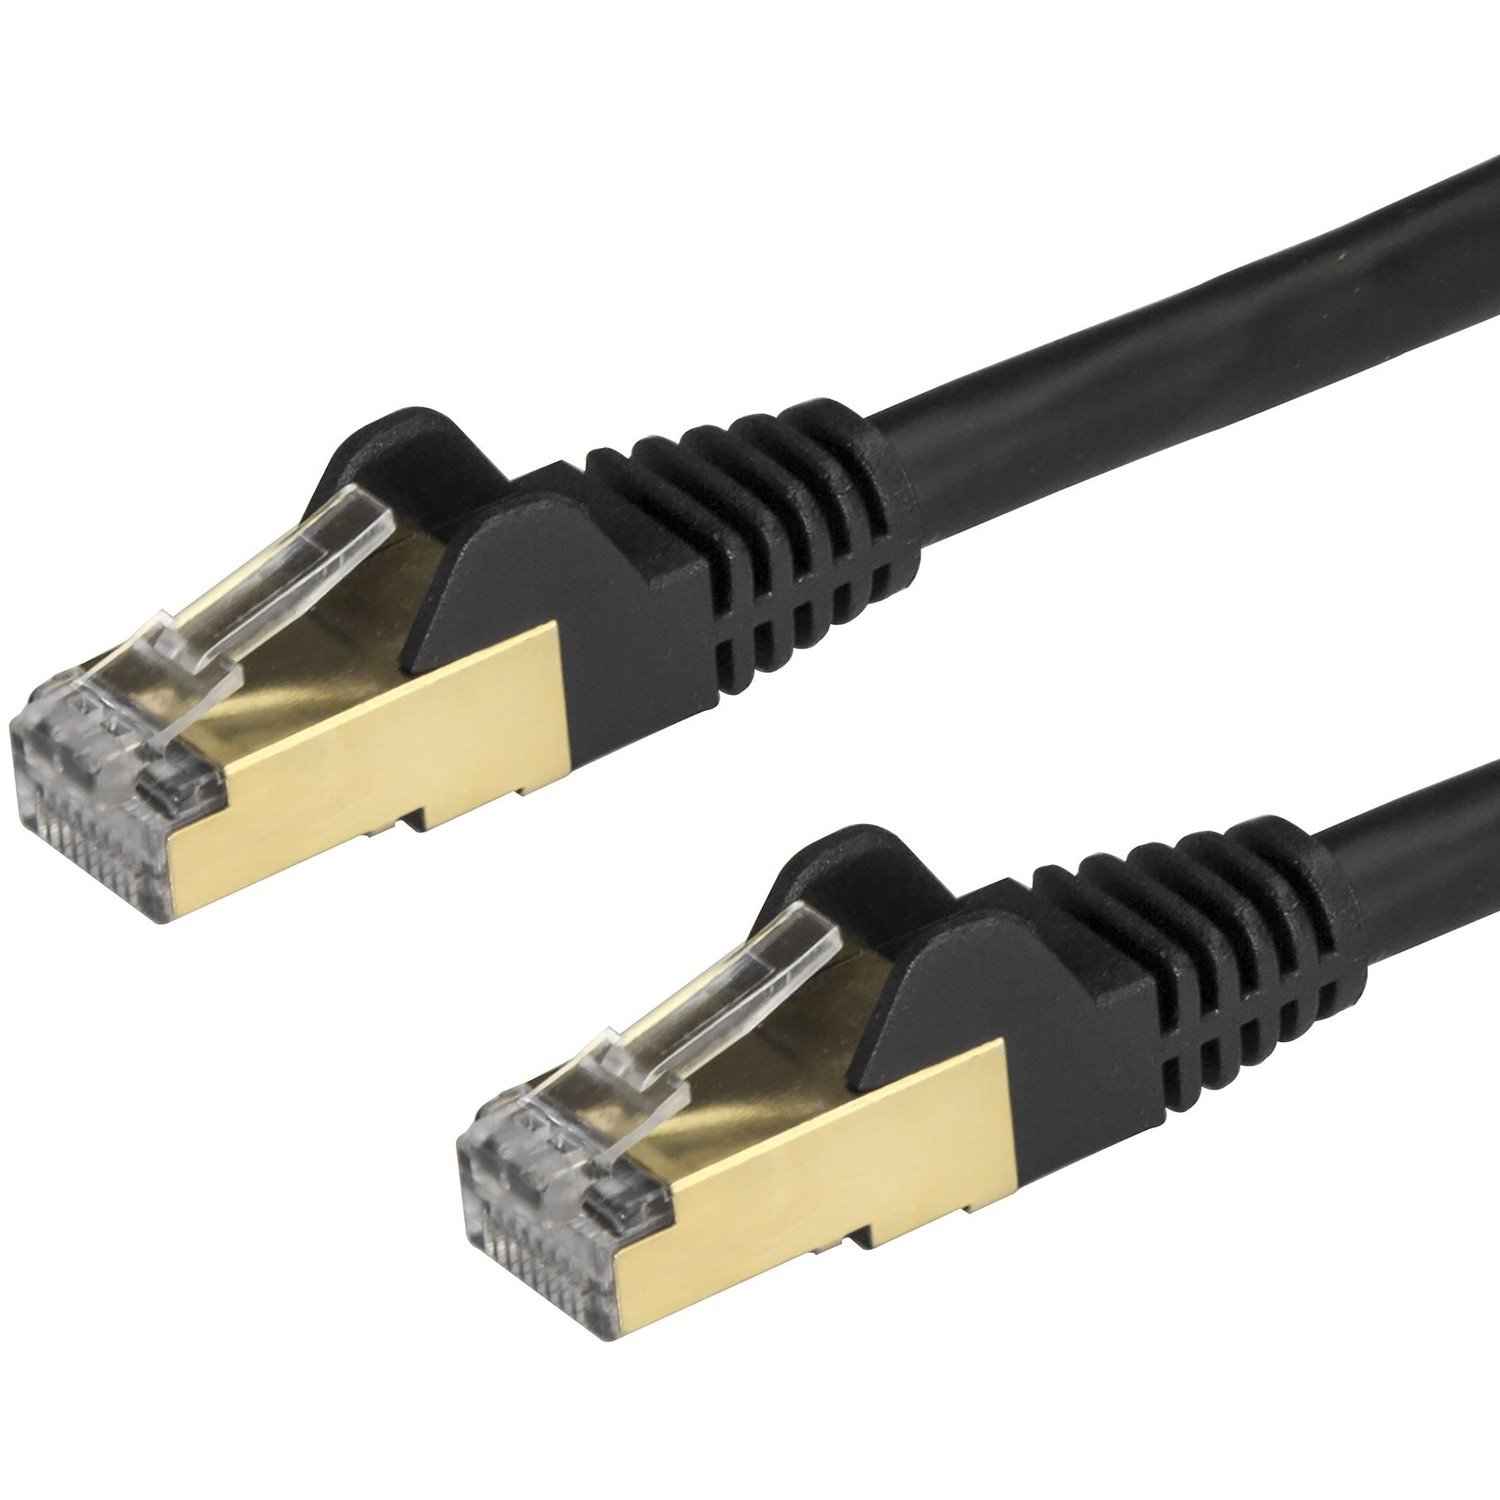 StarTech.com 2 m Category 6a Network Cable for PoE-enabled Device, Computer, Hub, Router, Patch Panel - 1